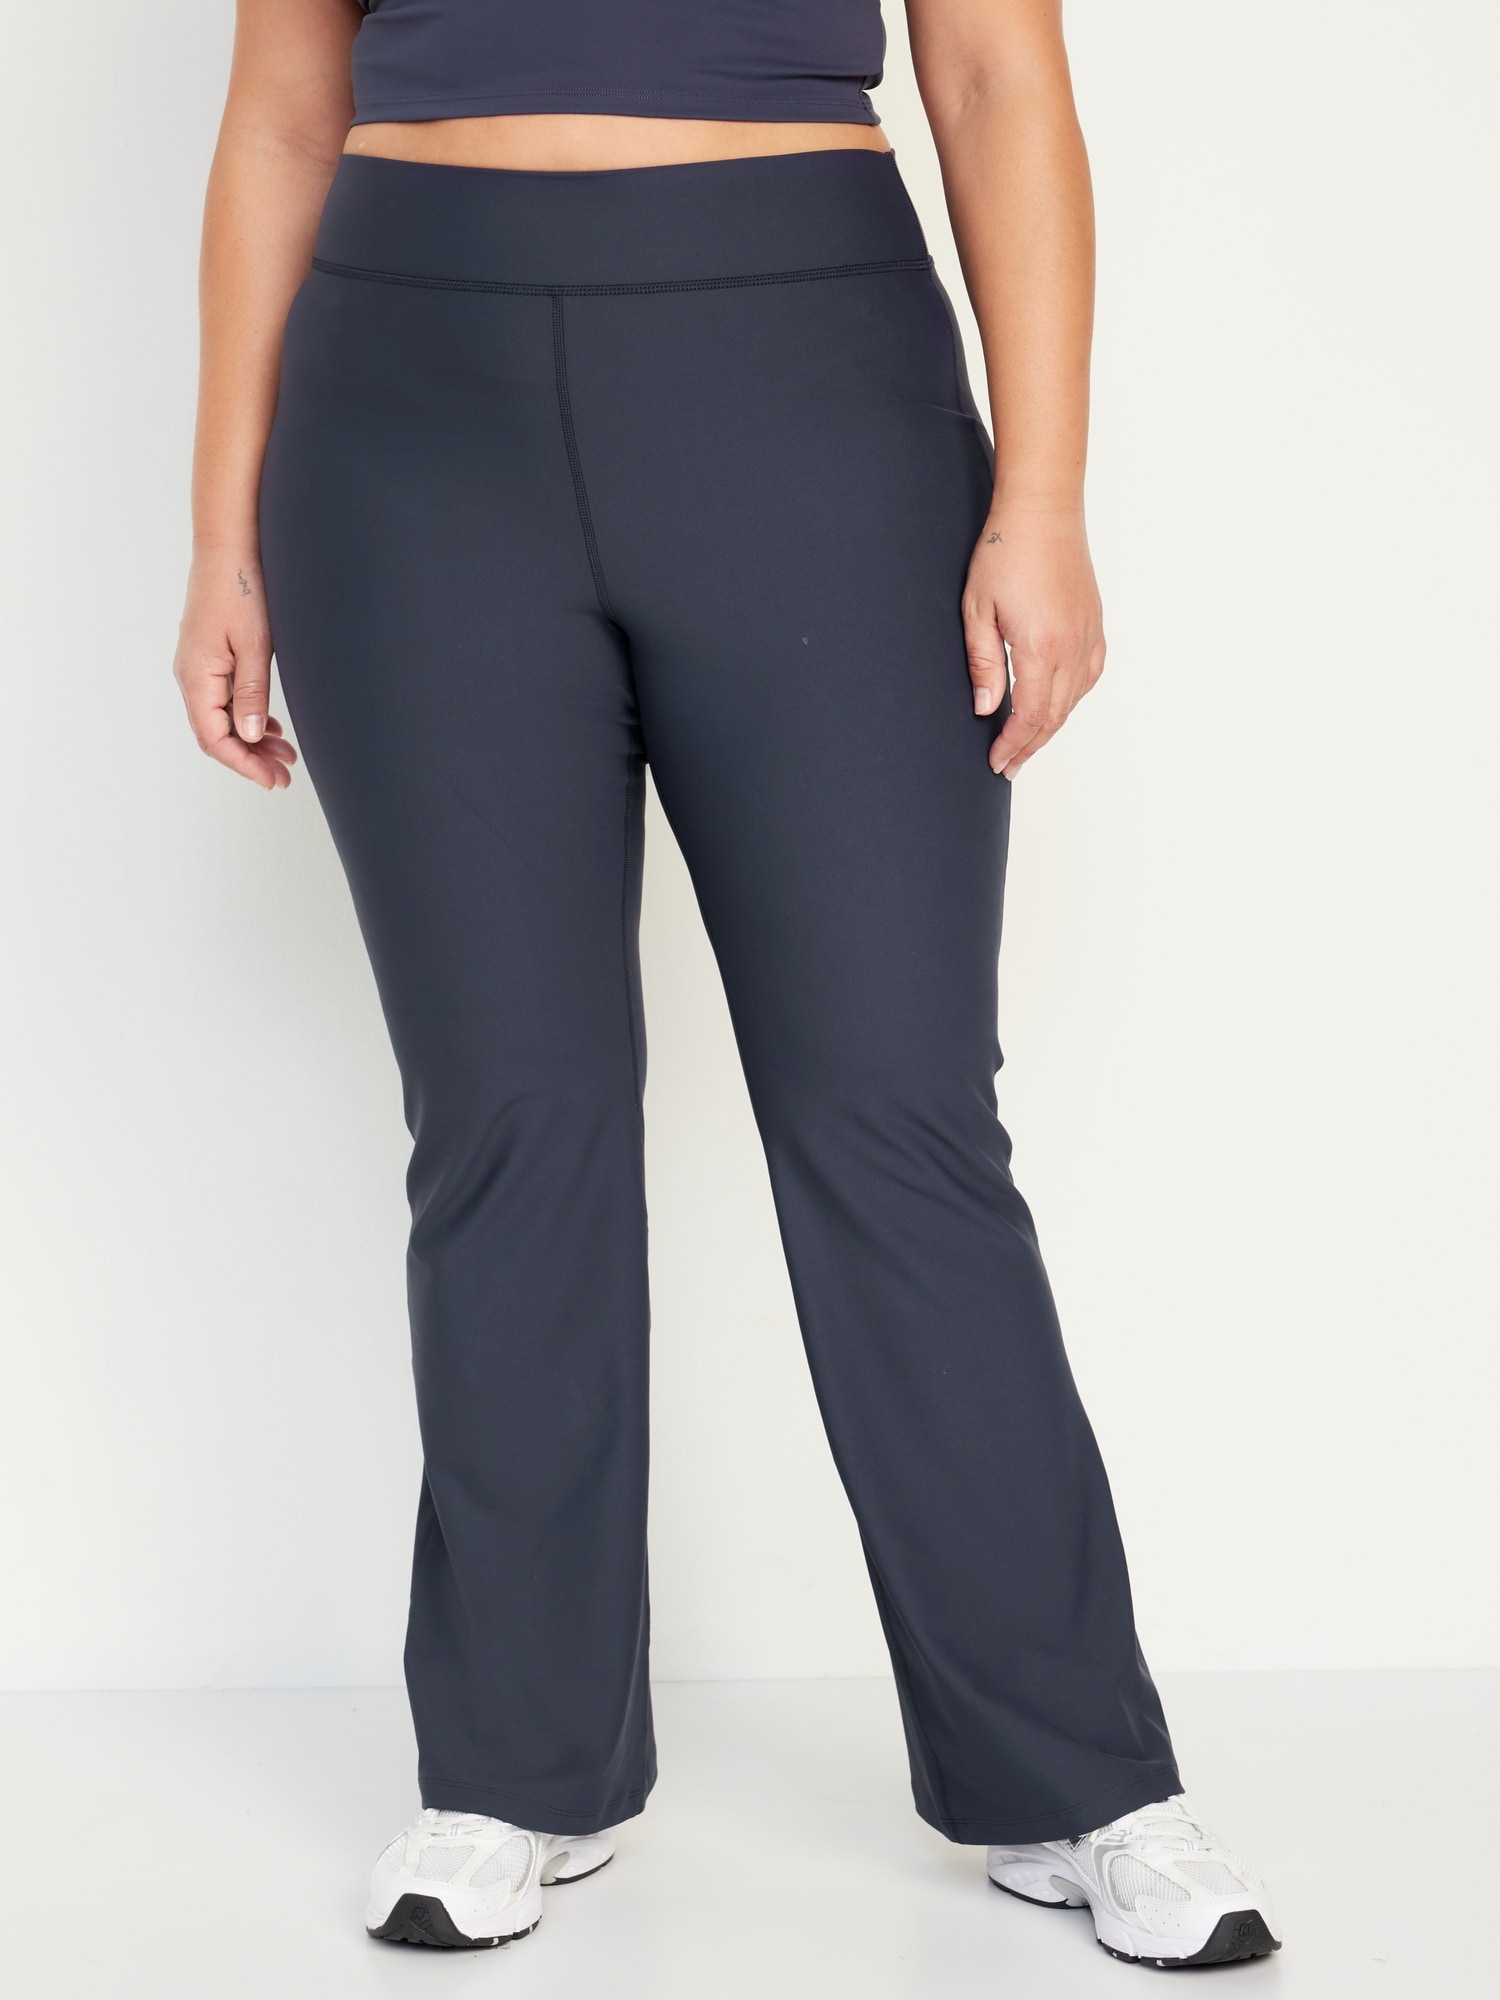 Extra High-Waisted PowerSoft Flare Leggings | Old Navy